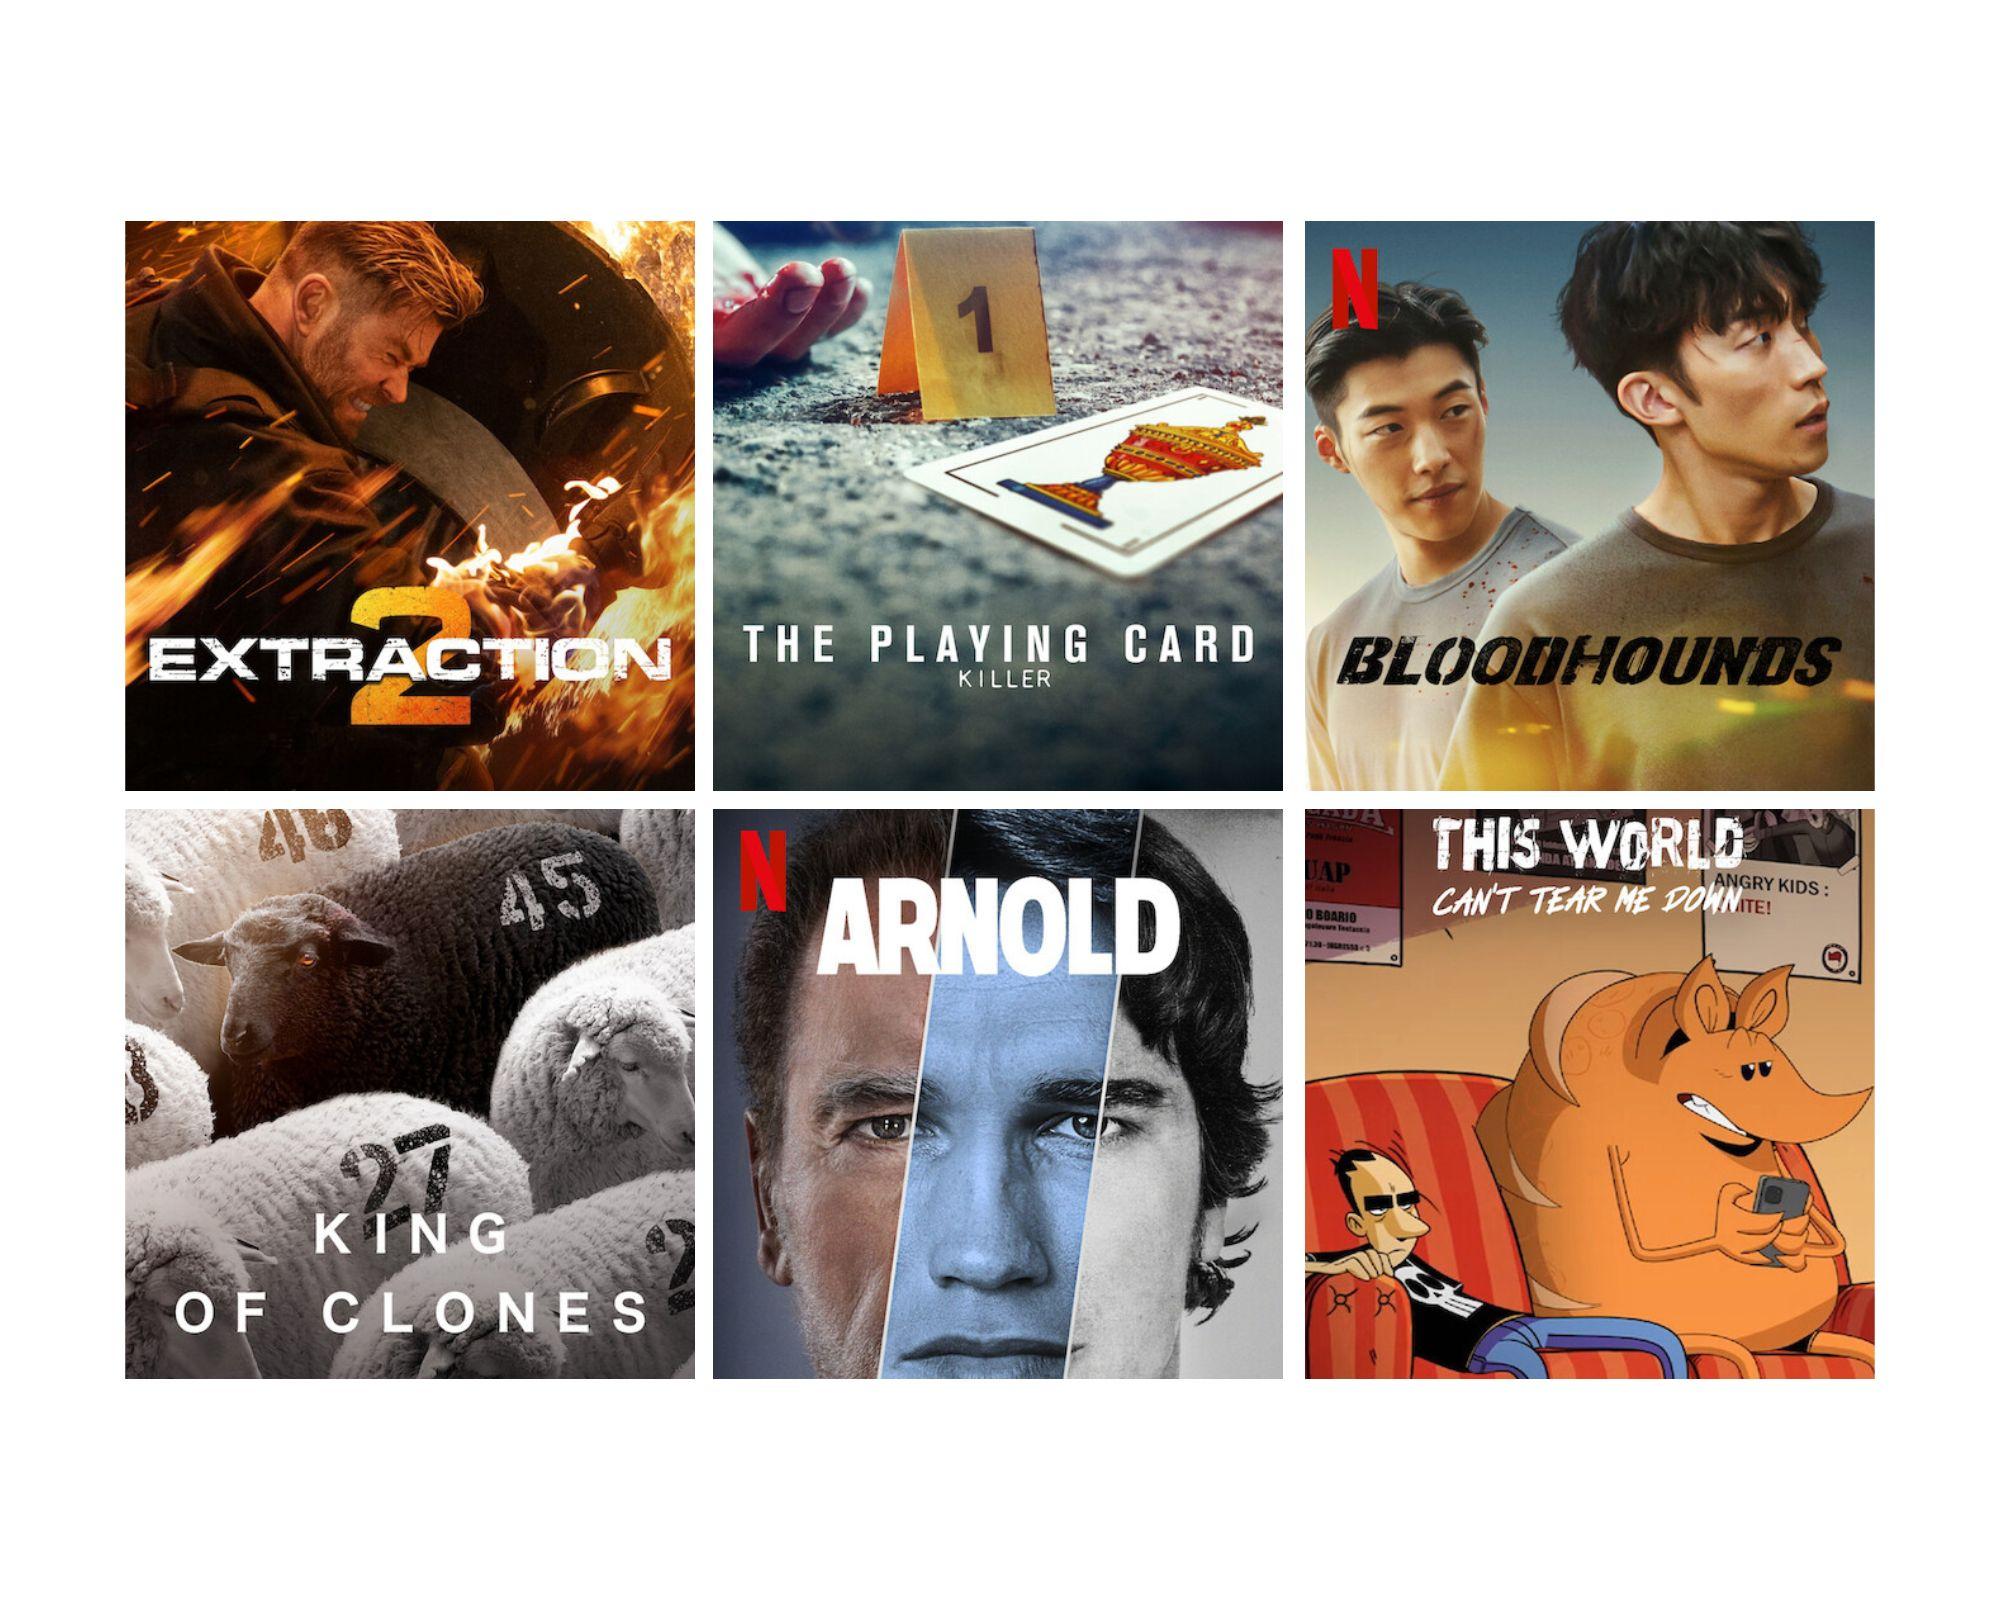 Movies & TV Shows I Look Forward To Watching on Netflix in June